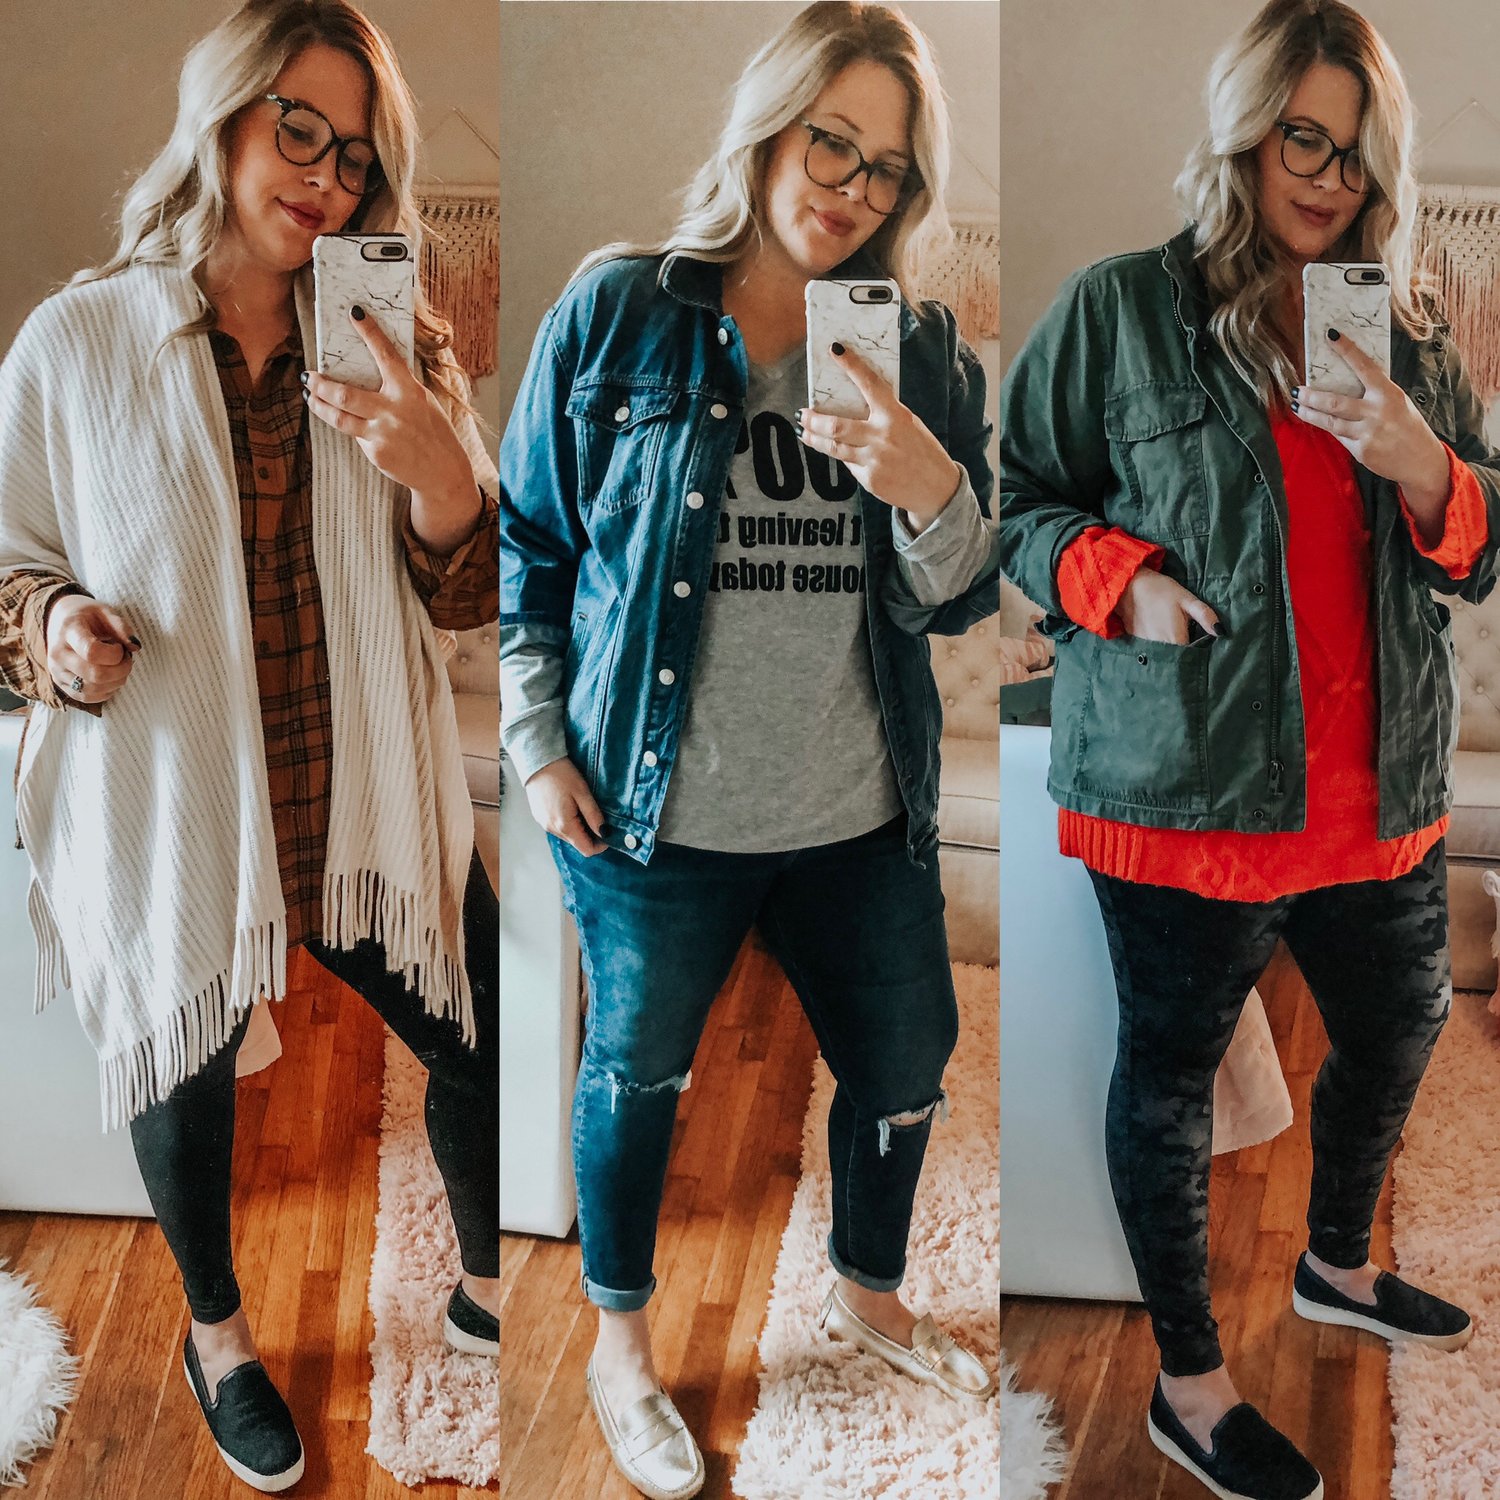 3 DAYS OF PLUS SIZE DENIM OUTFITS — House of Dorough